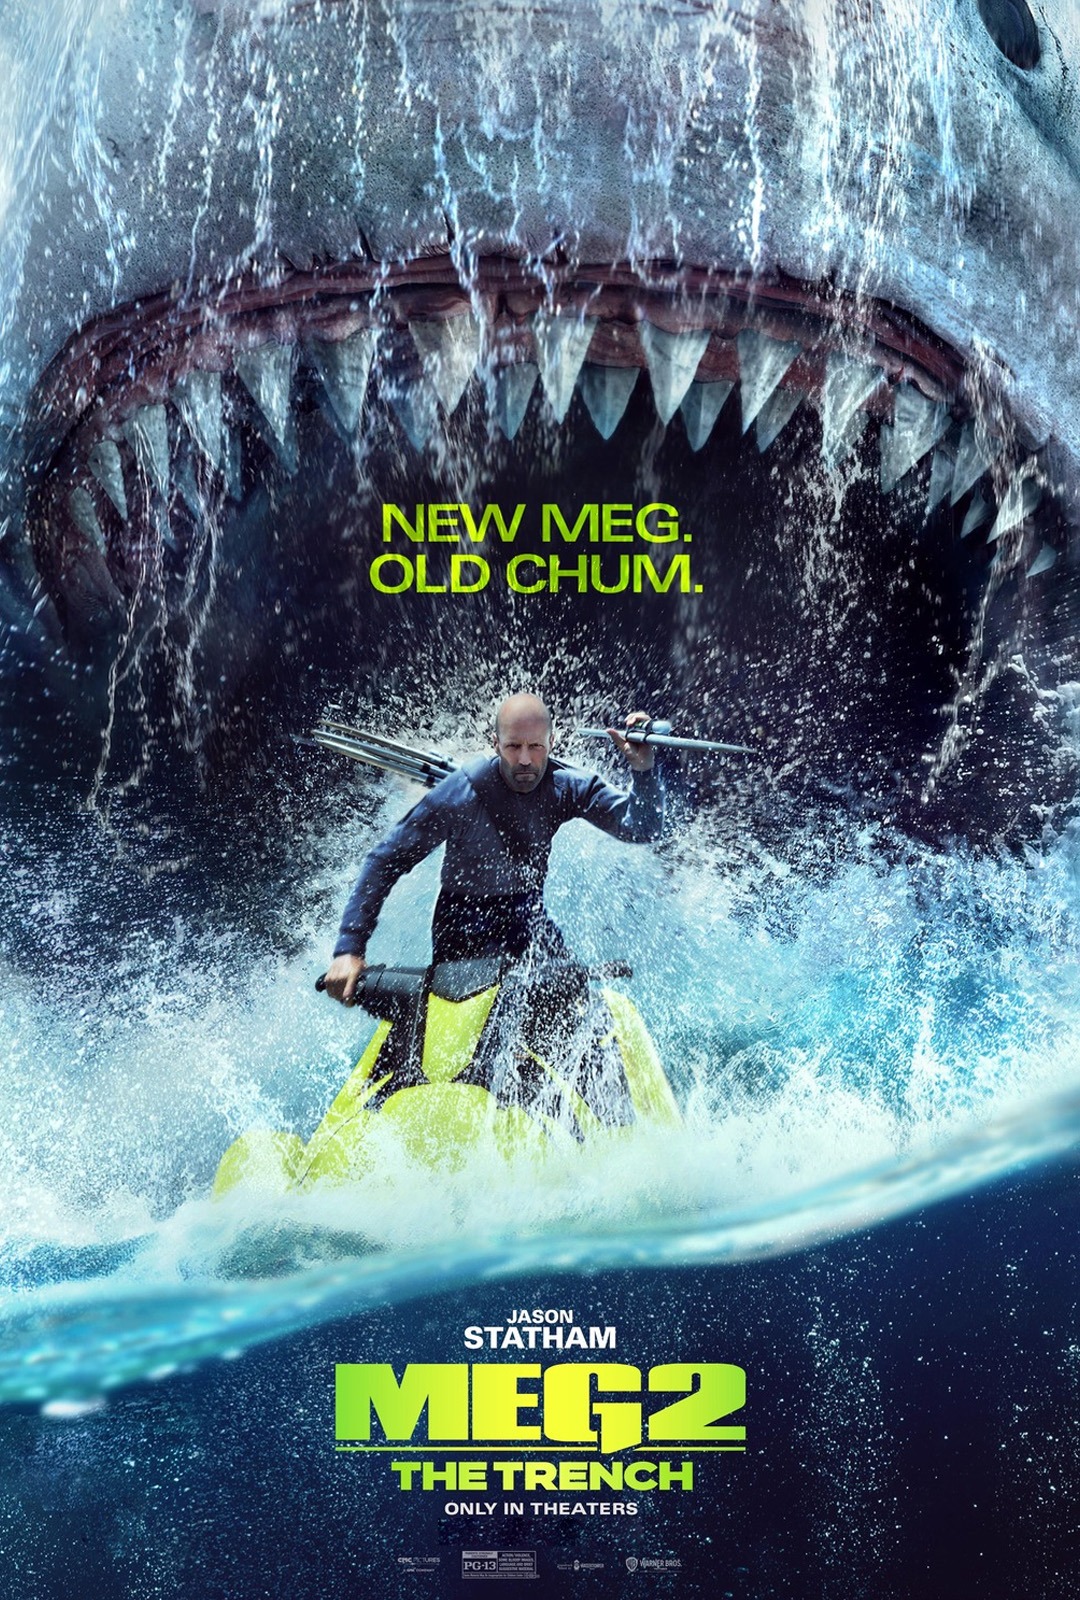 Movie Poster: The Meg 2: The Trench